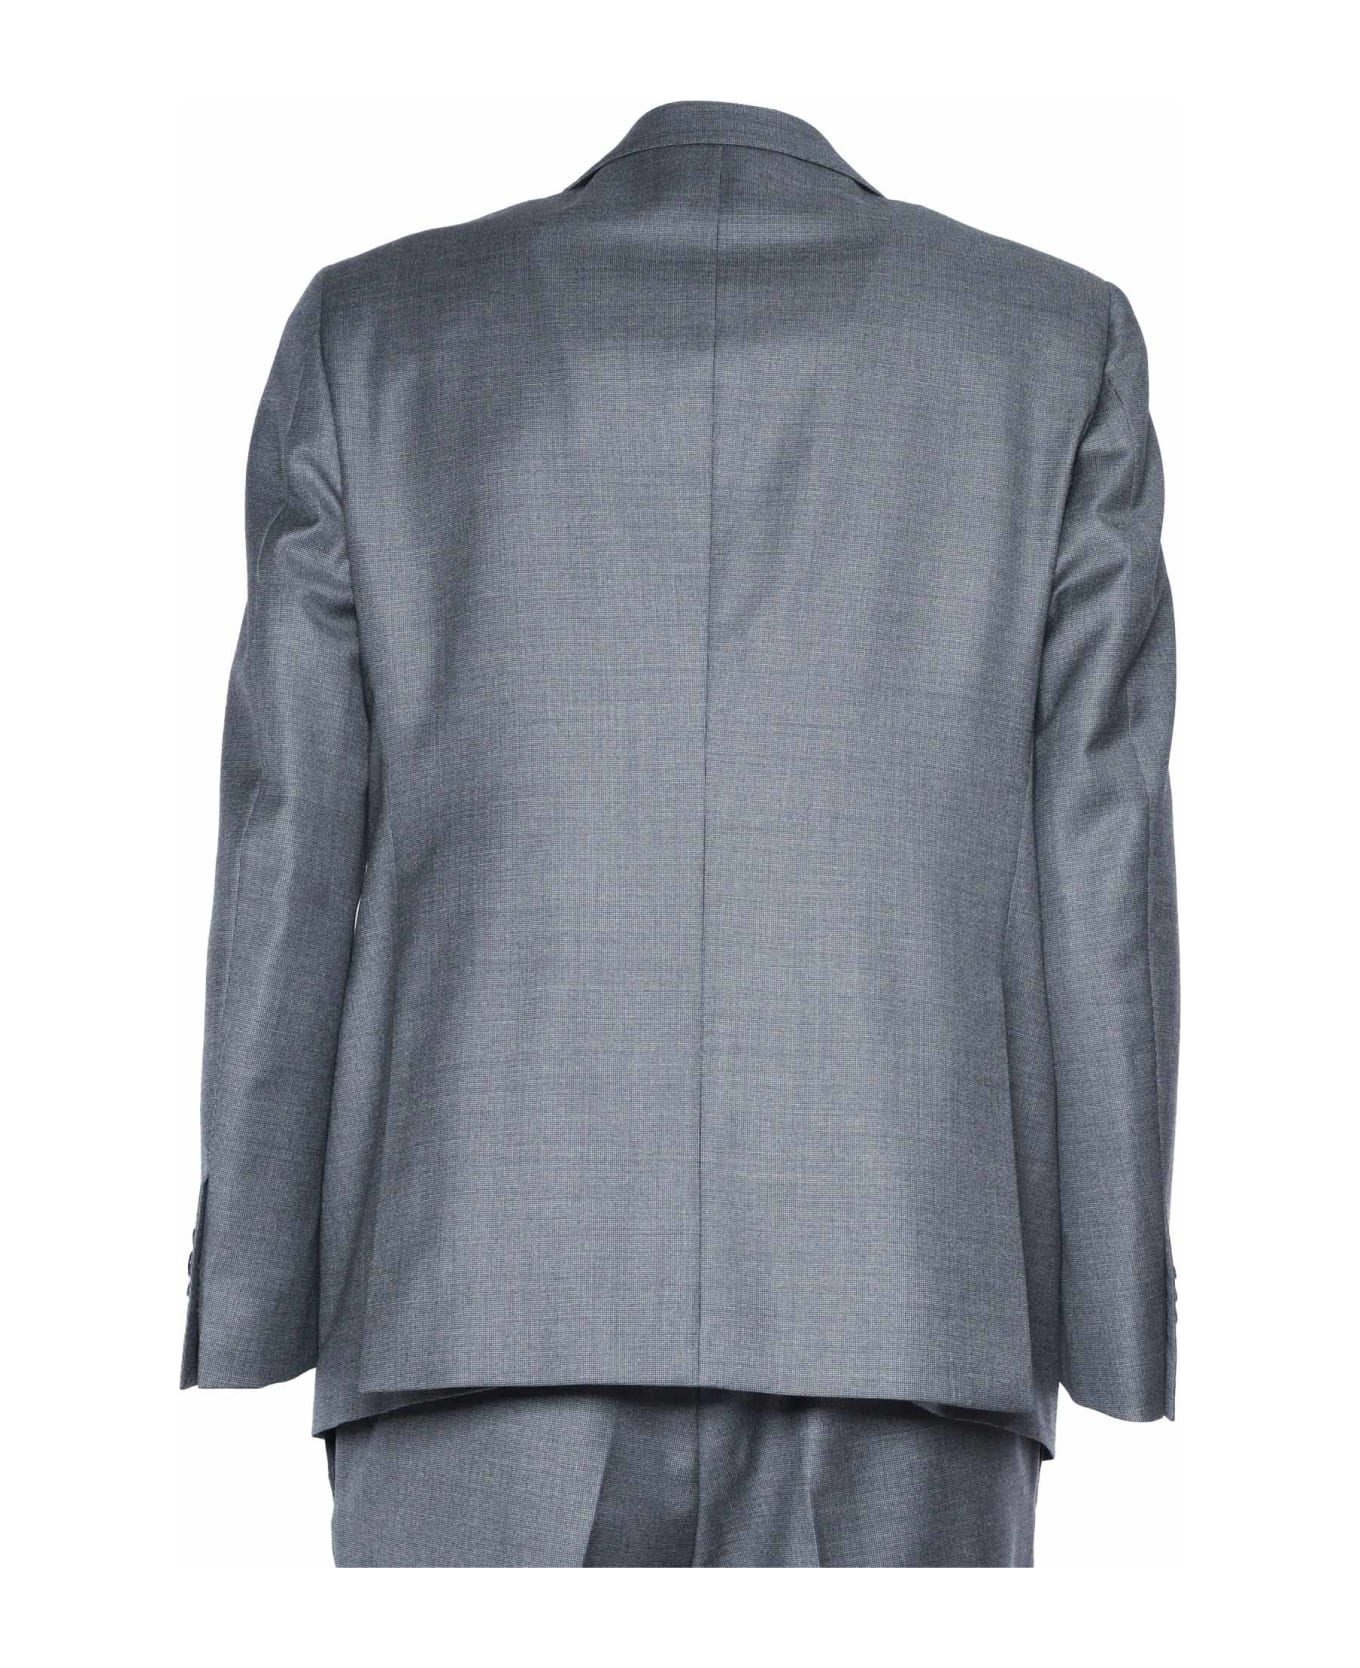 L.B.M. 1911 Single-breasted Suit - GREY